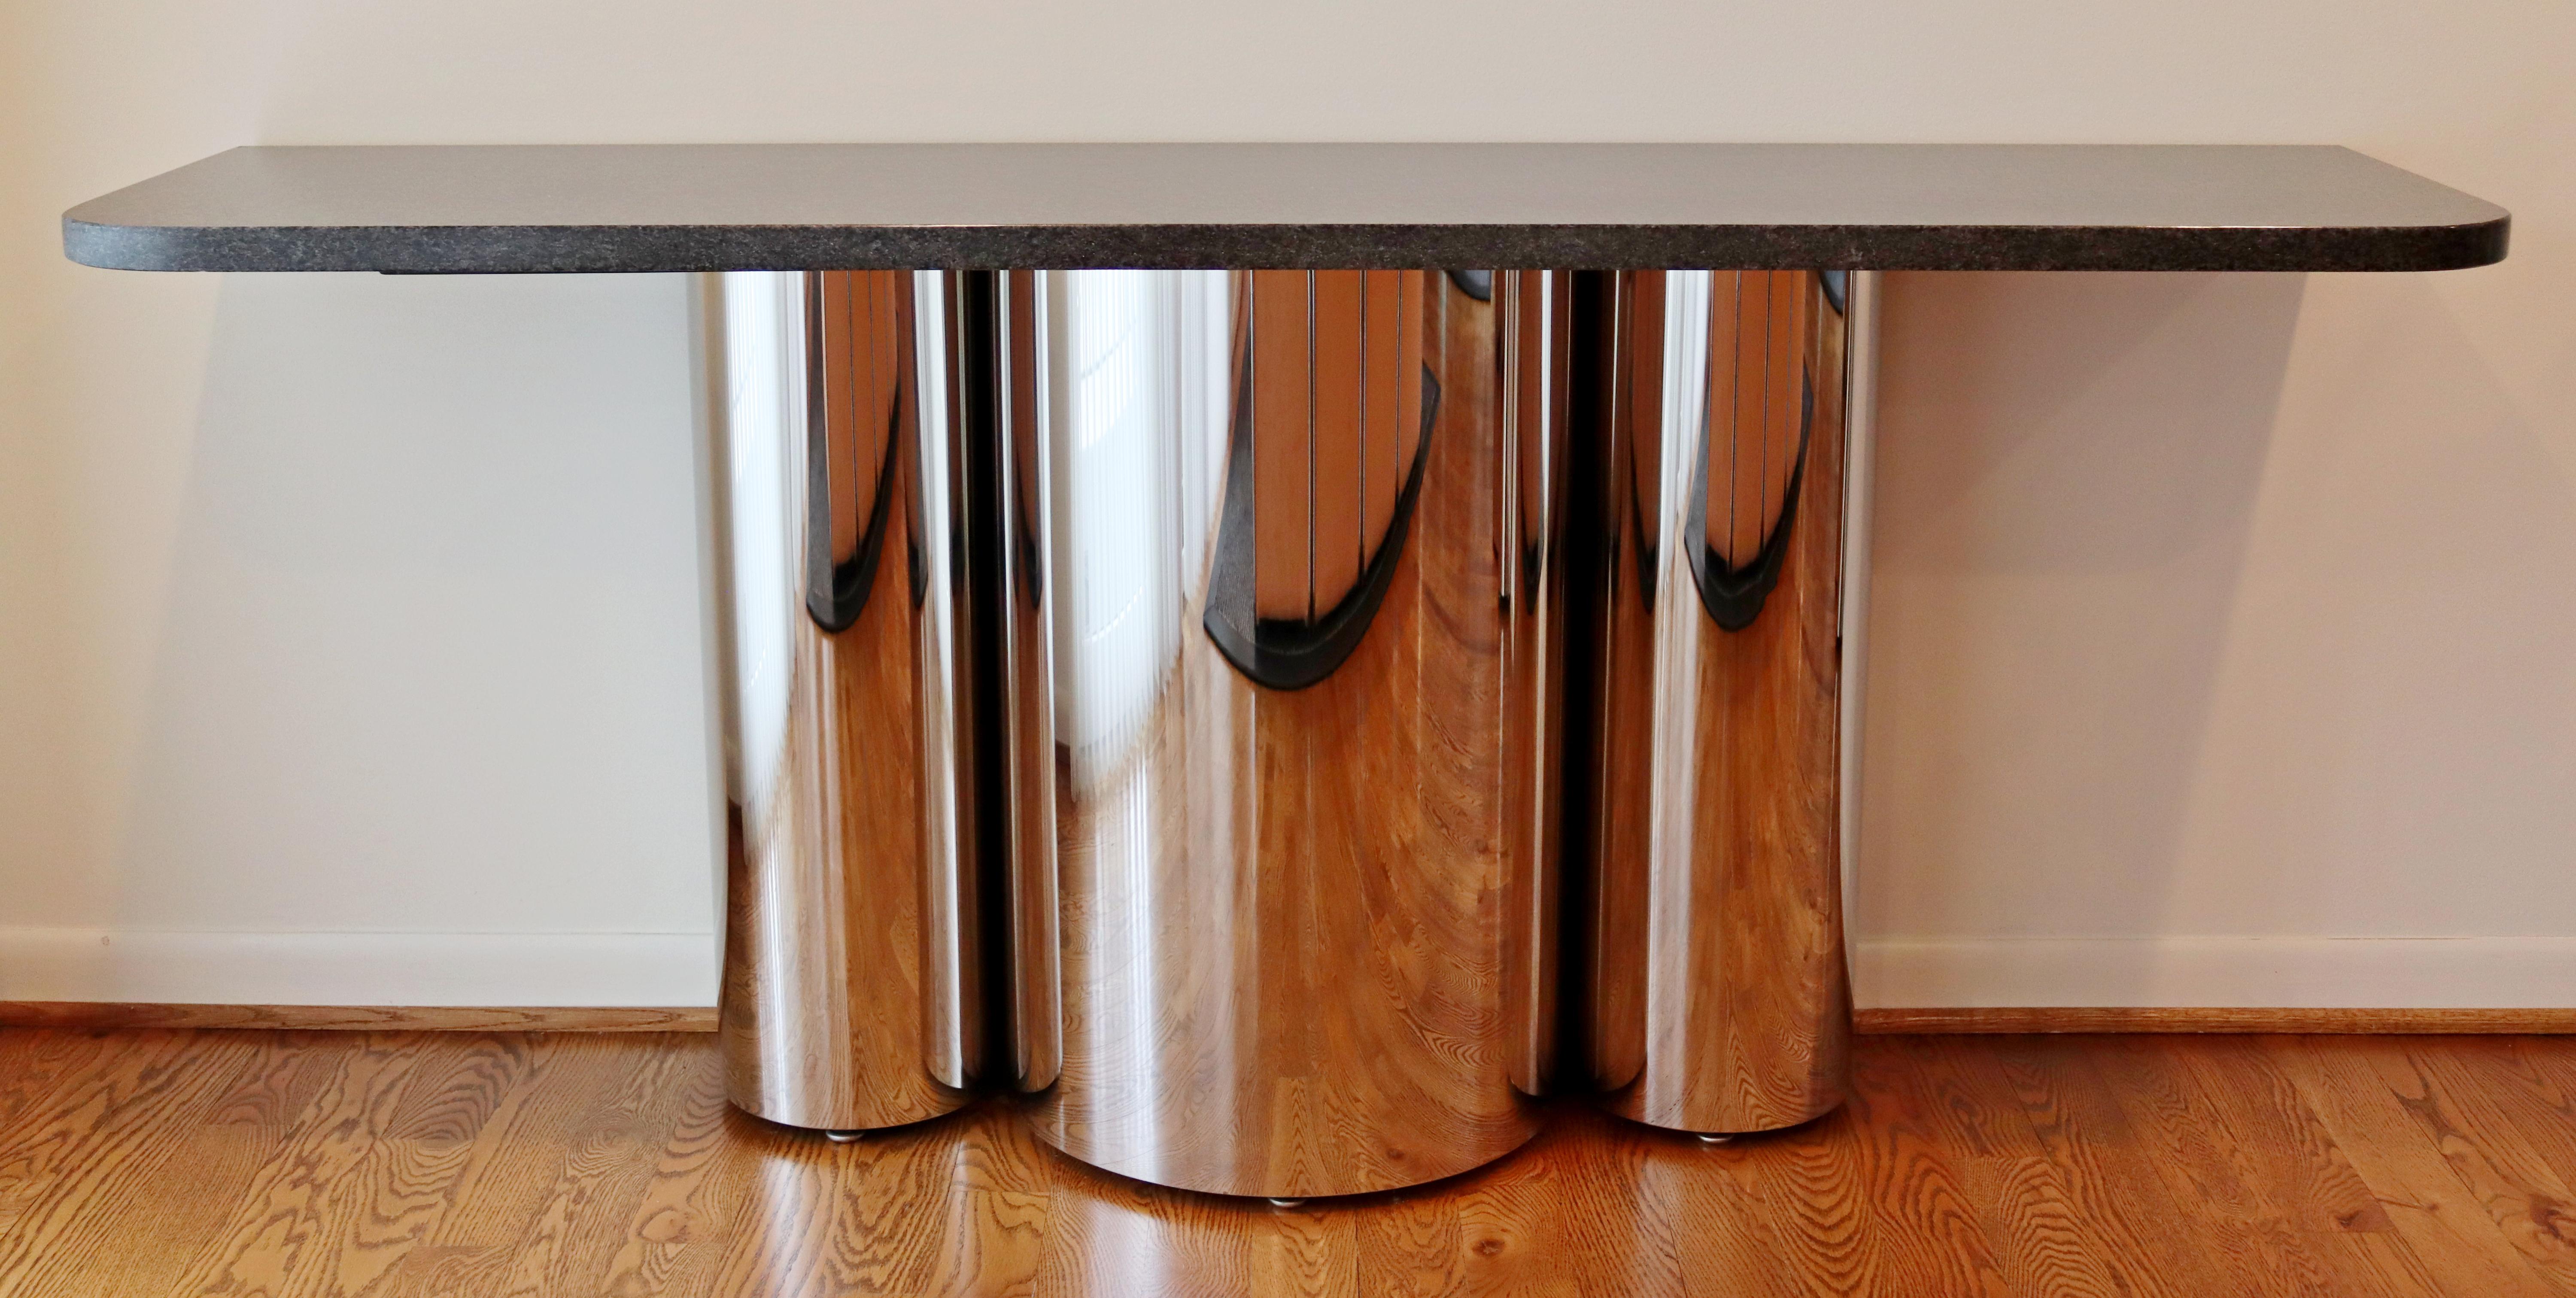 For your consideration is a magnificent pair of console tables, made of chrome and with marble tops, circa the 1970s. In excellent vintage condition. The dimensions are 66